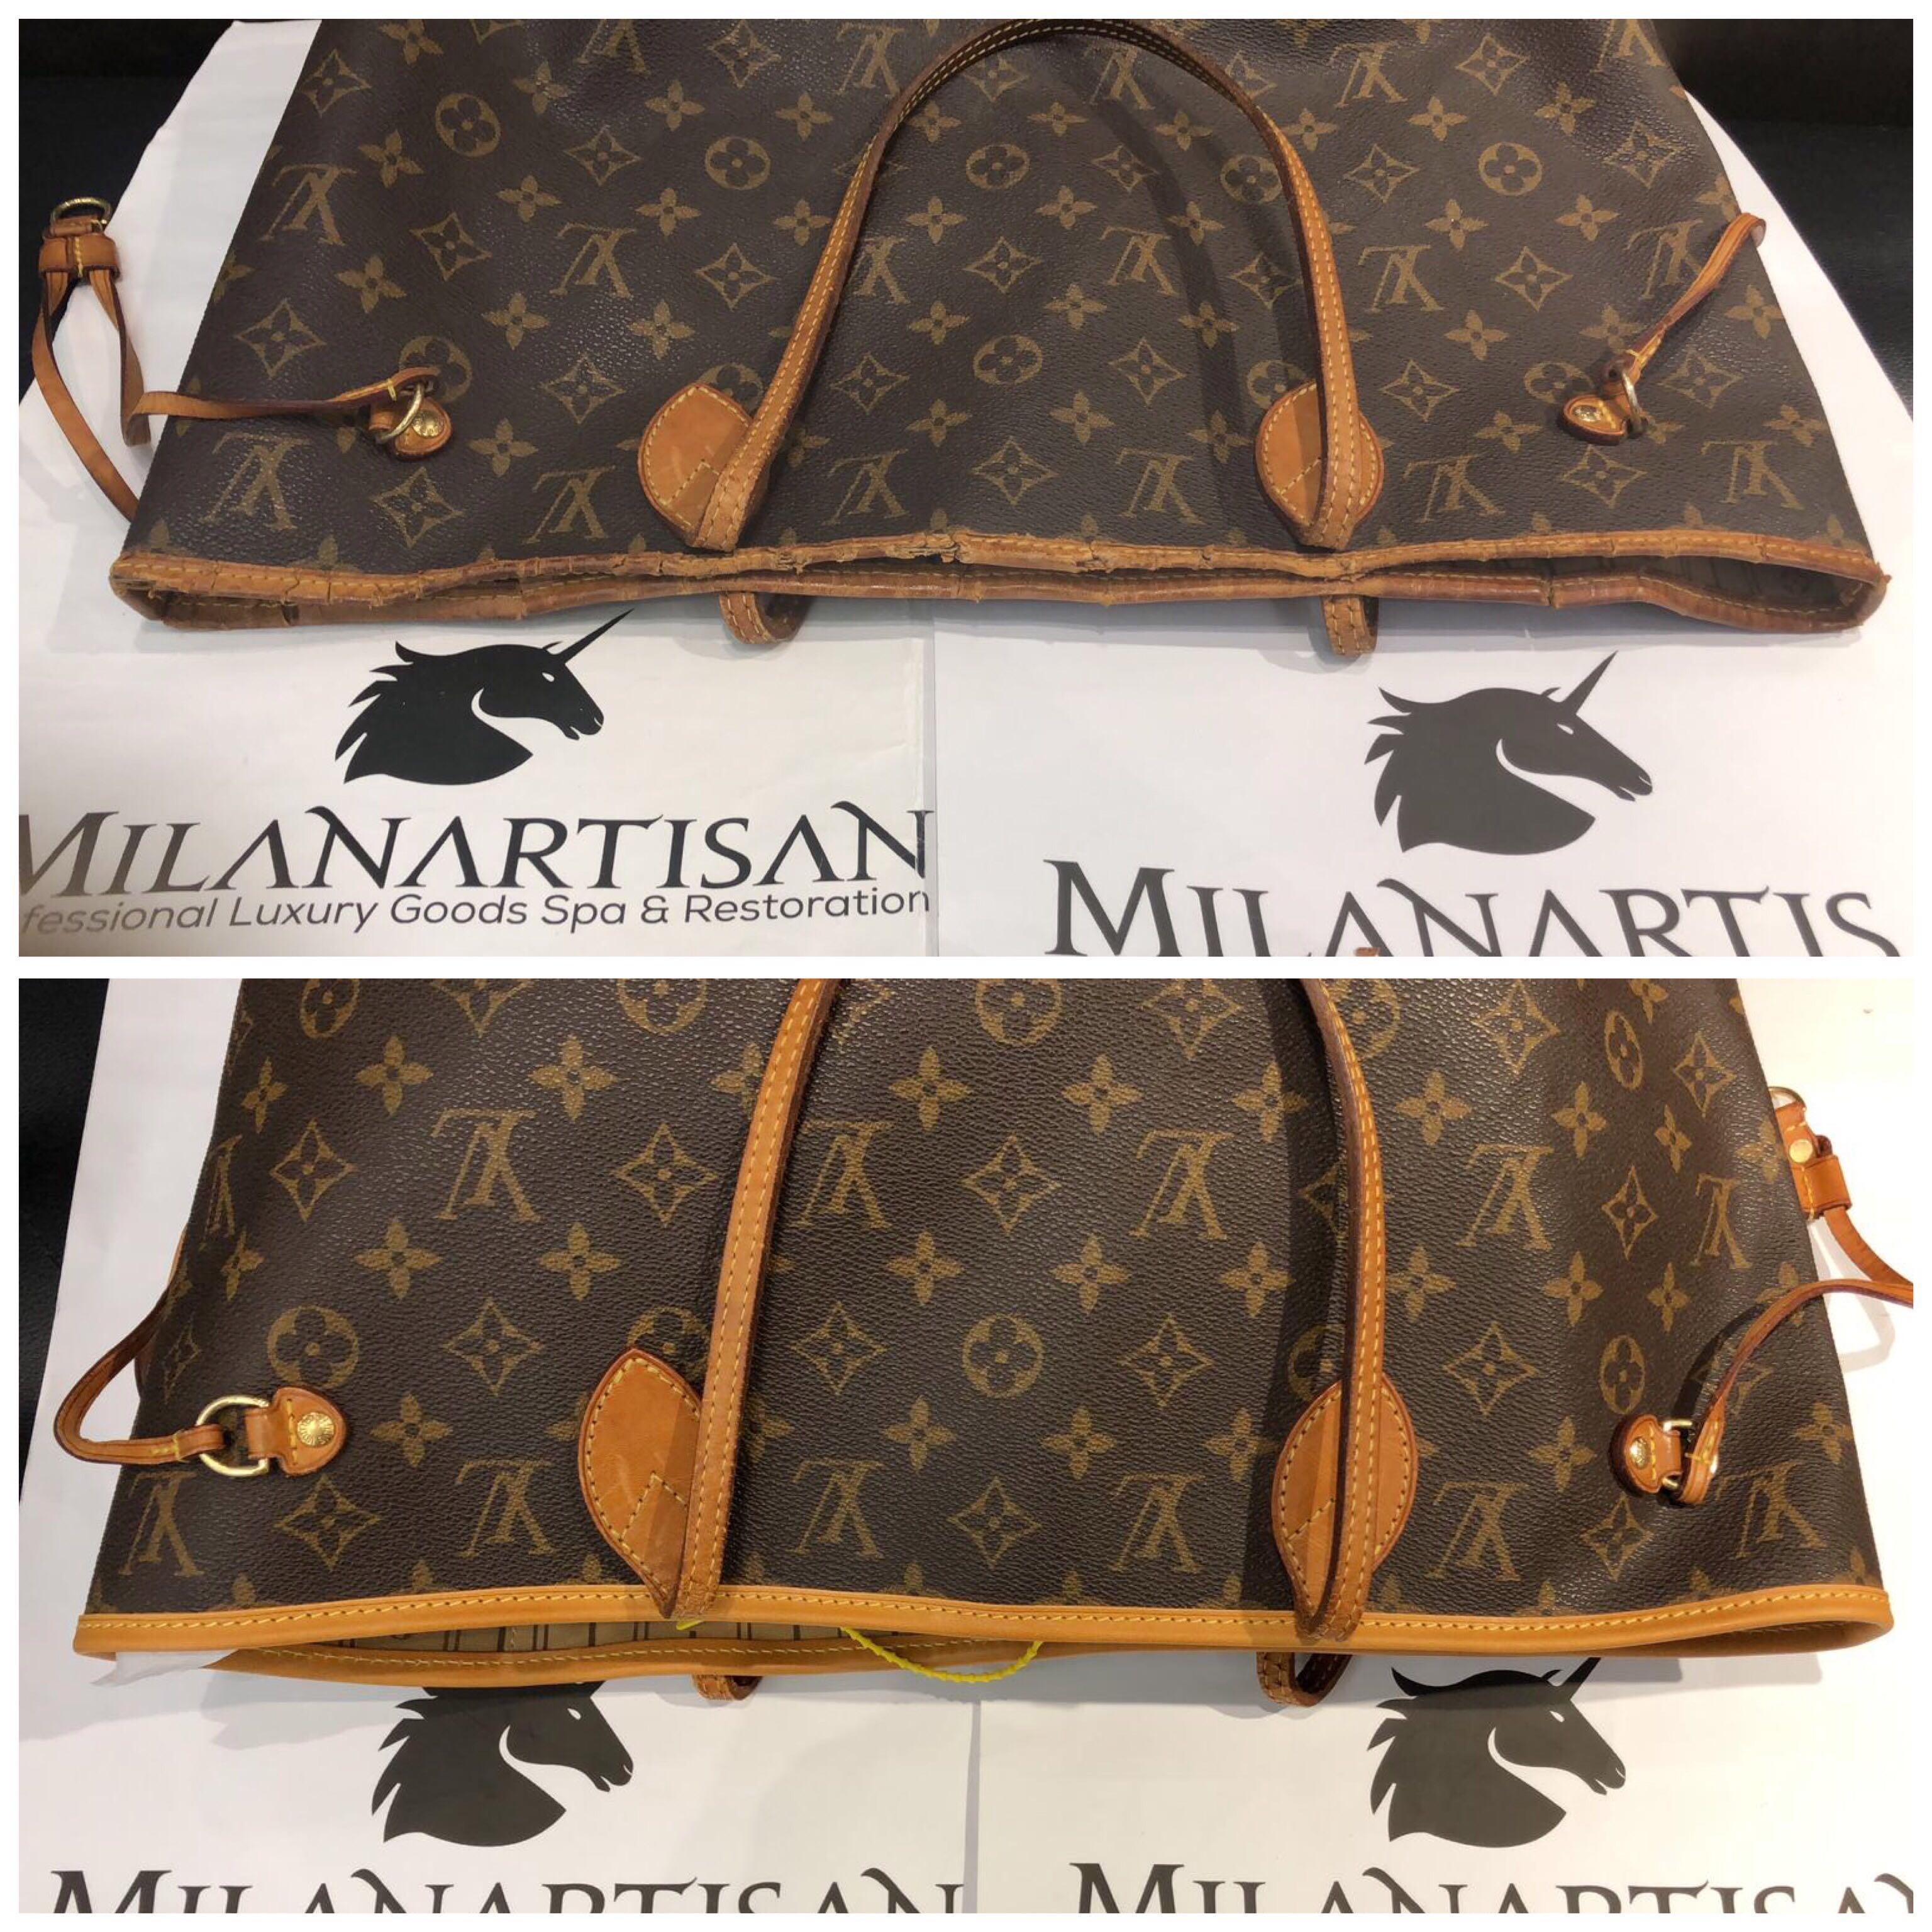 LOUIS VUITTON NEVERFULL BAG WITH WORN OUT TRIMMING REPLACE BEAUTIFULLY BY OUR MILAN ARTISAN ...